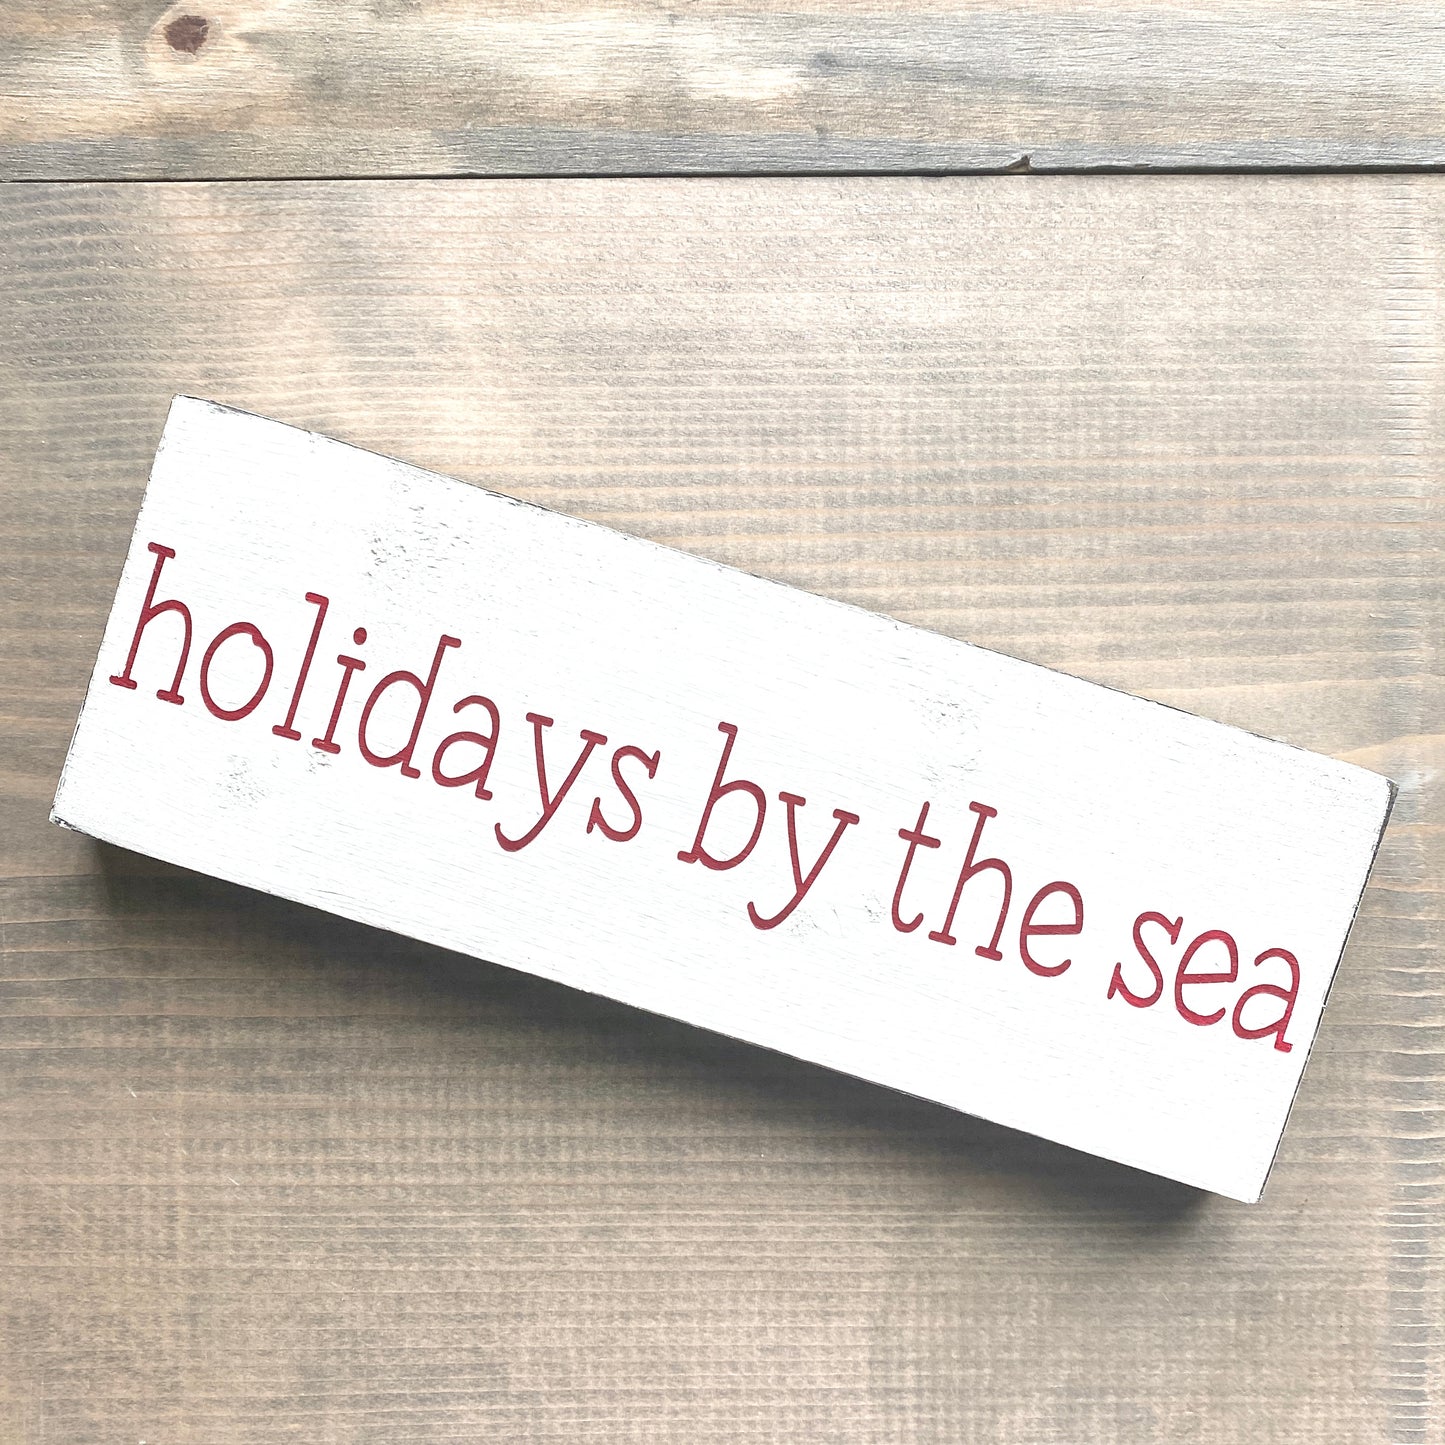 Holidays by the sea sign